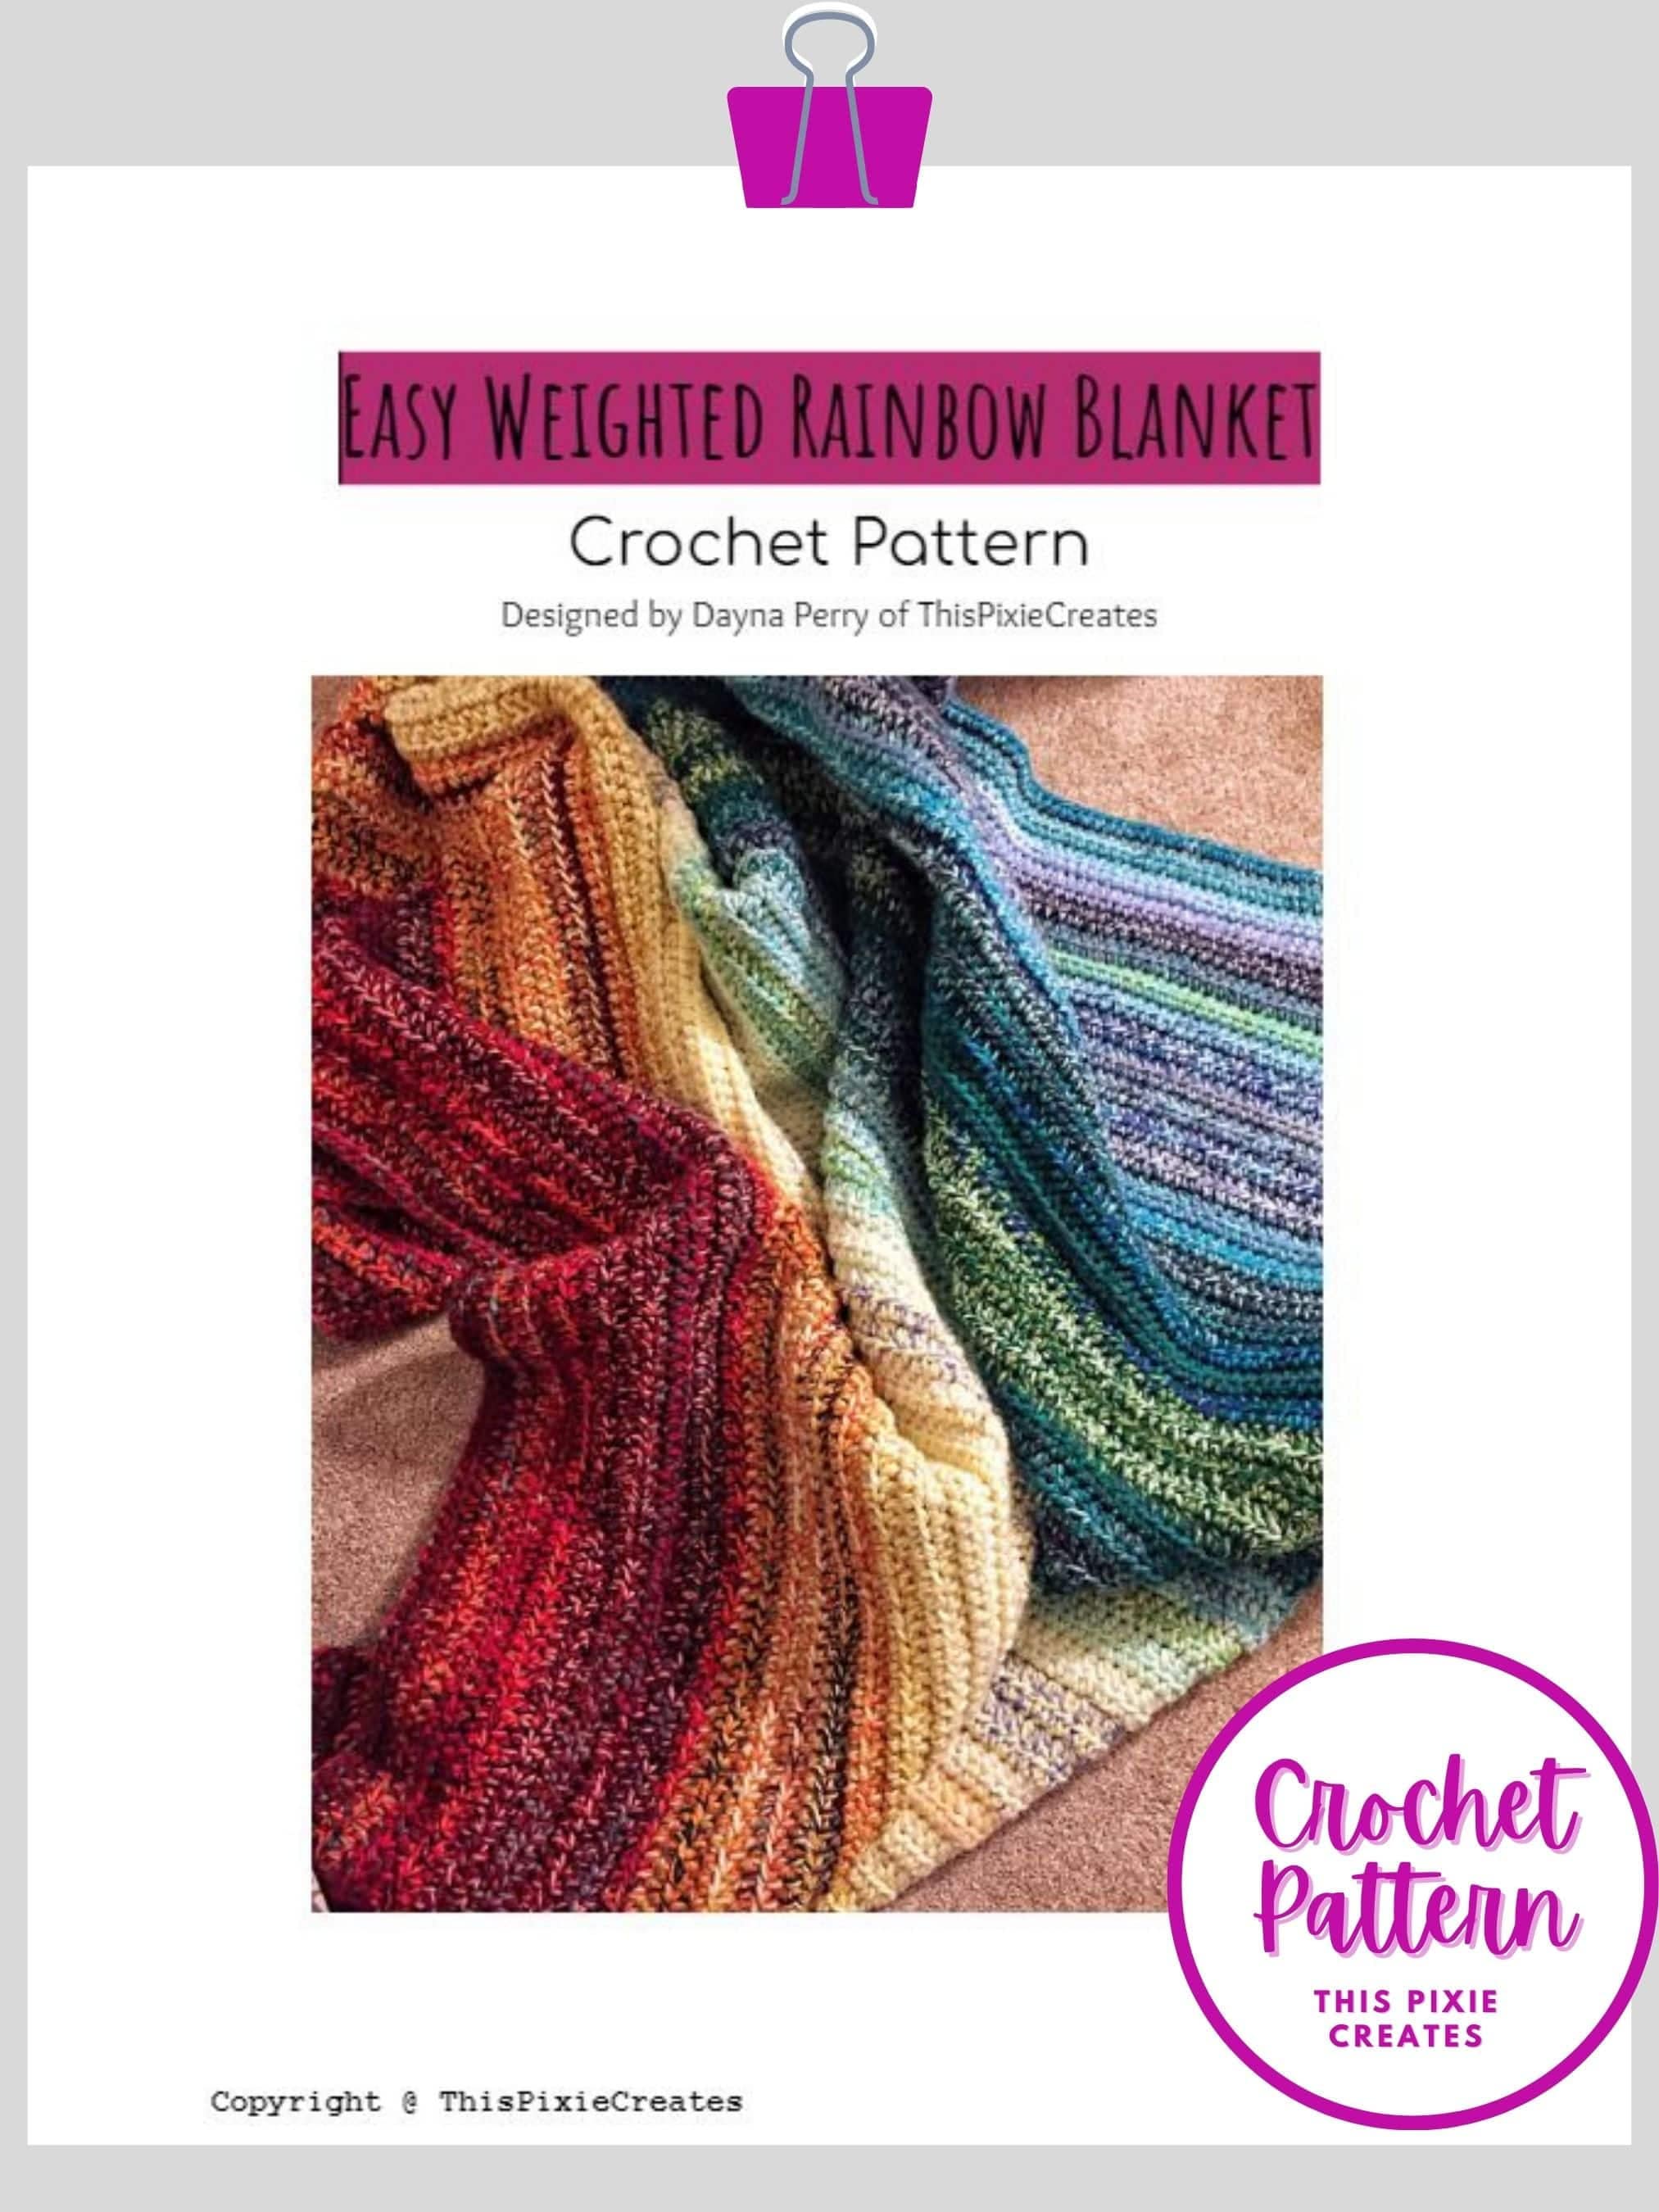 How to Crochet an Easy Weighted Rainbow Blanket - This Pixie Creates